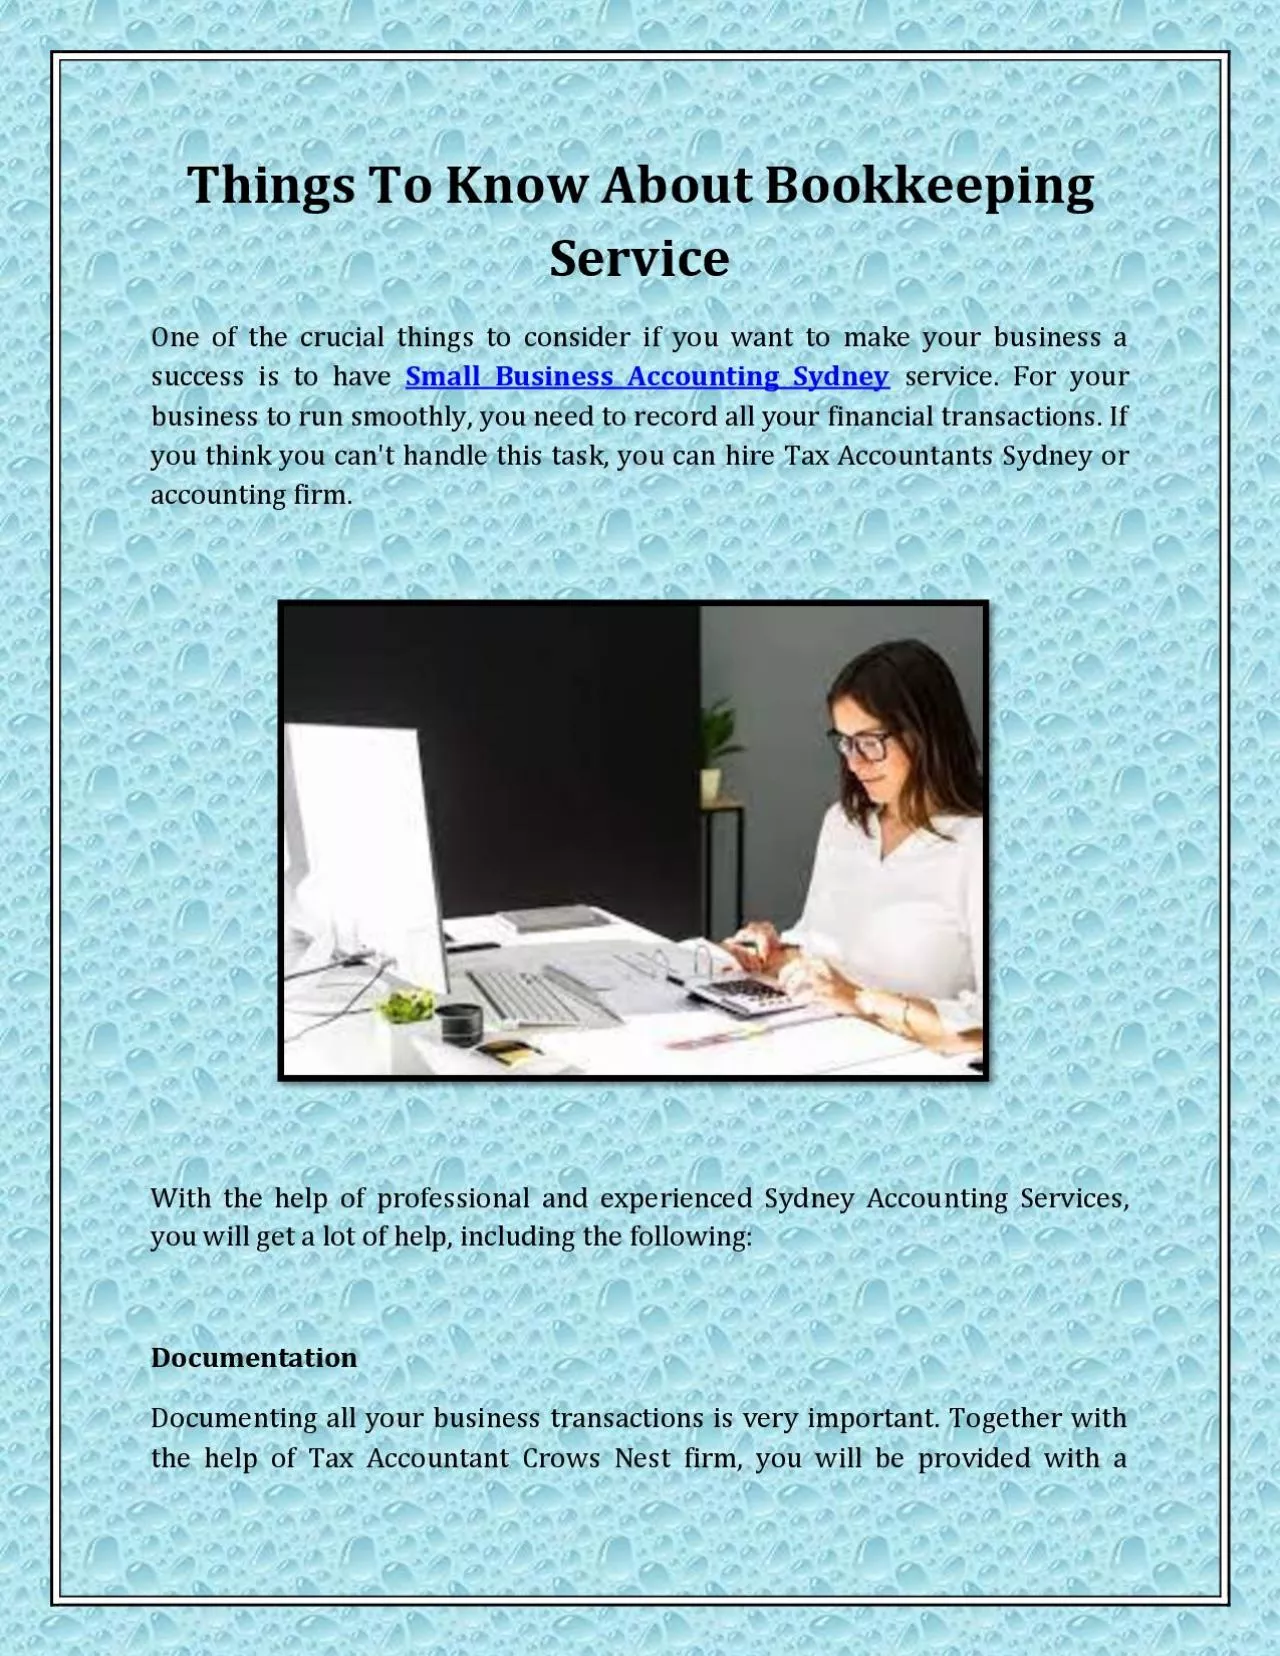 Things To Know About Bookkeeping Service